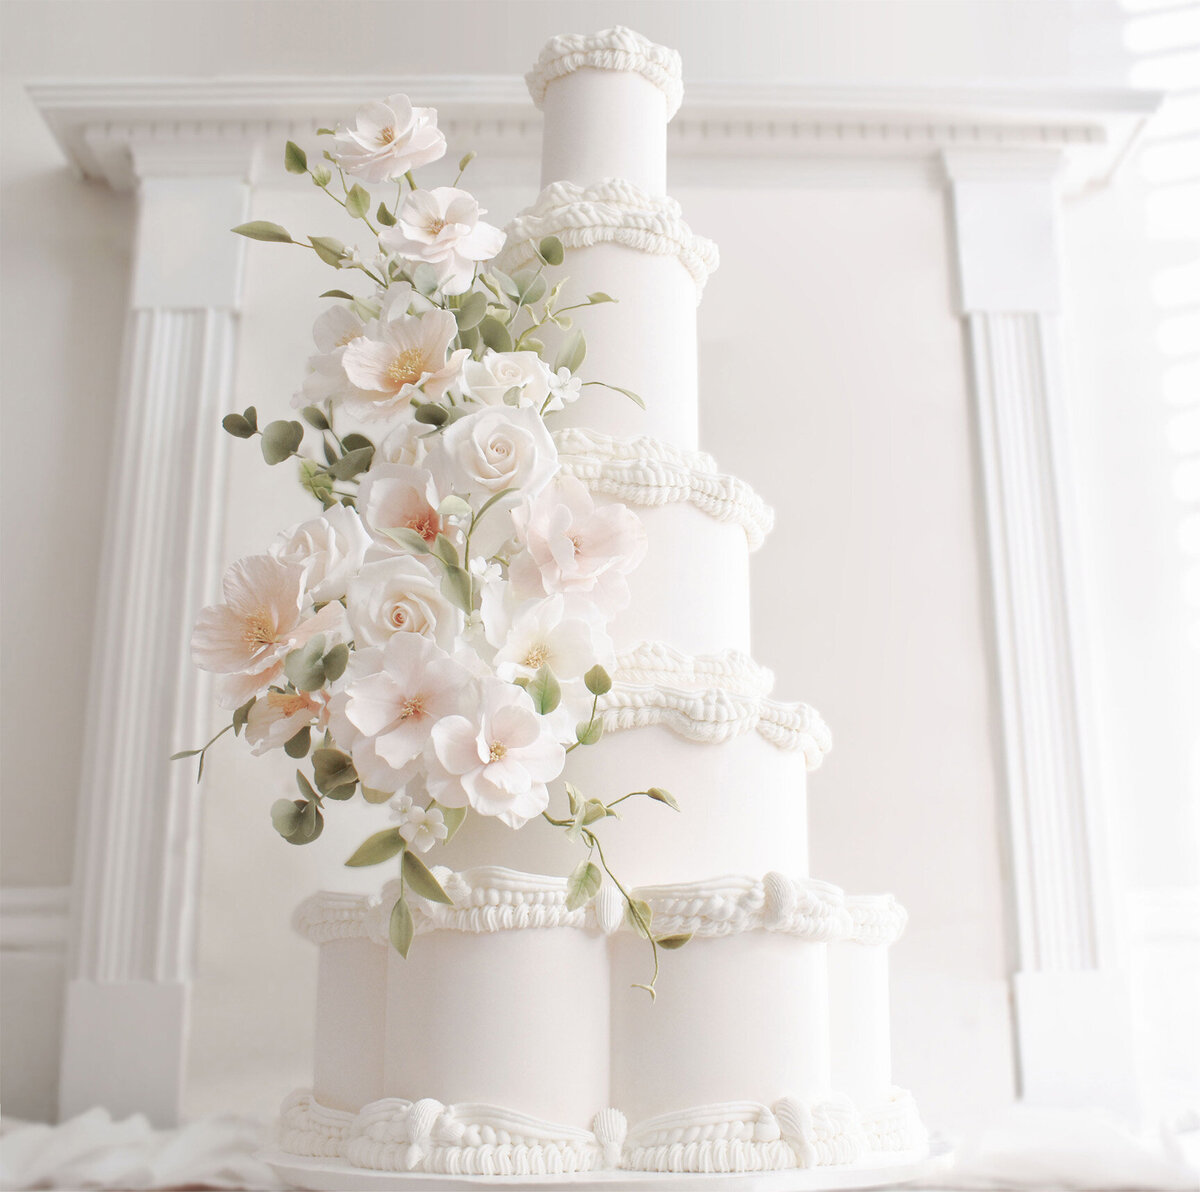 9 Of The Best Bakeries To Buy Your Wedding Cake From | SheerLuxe